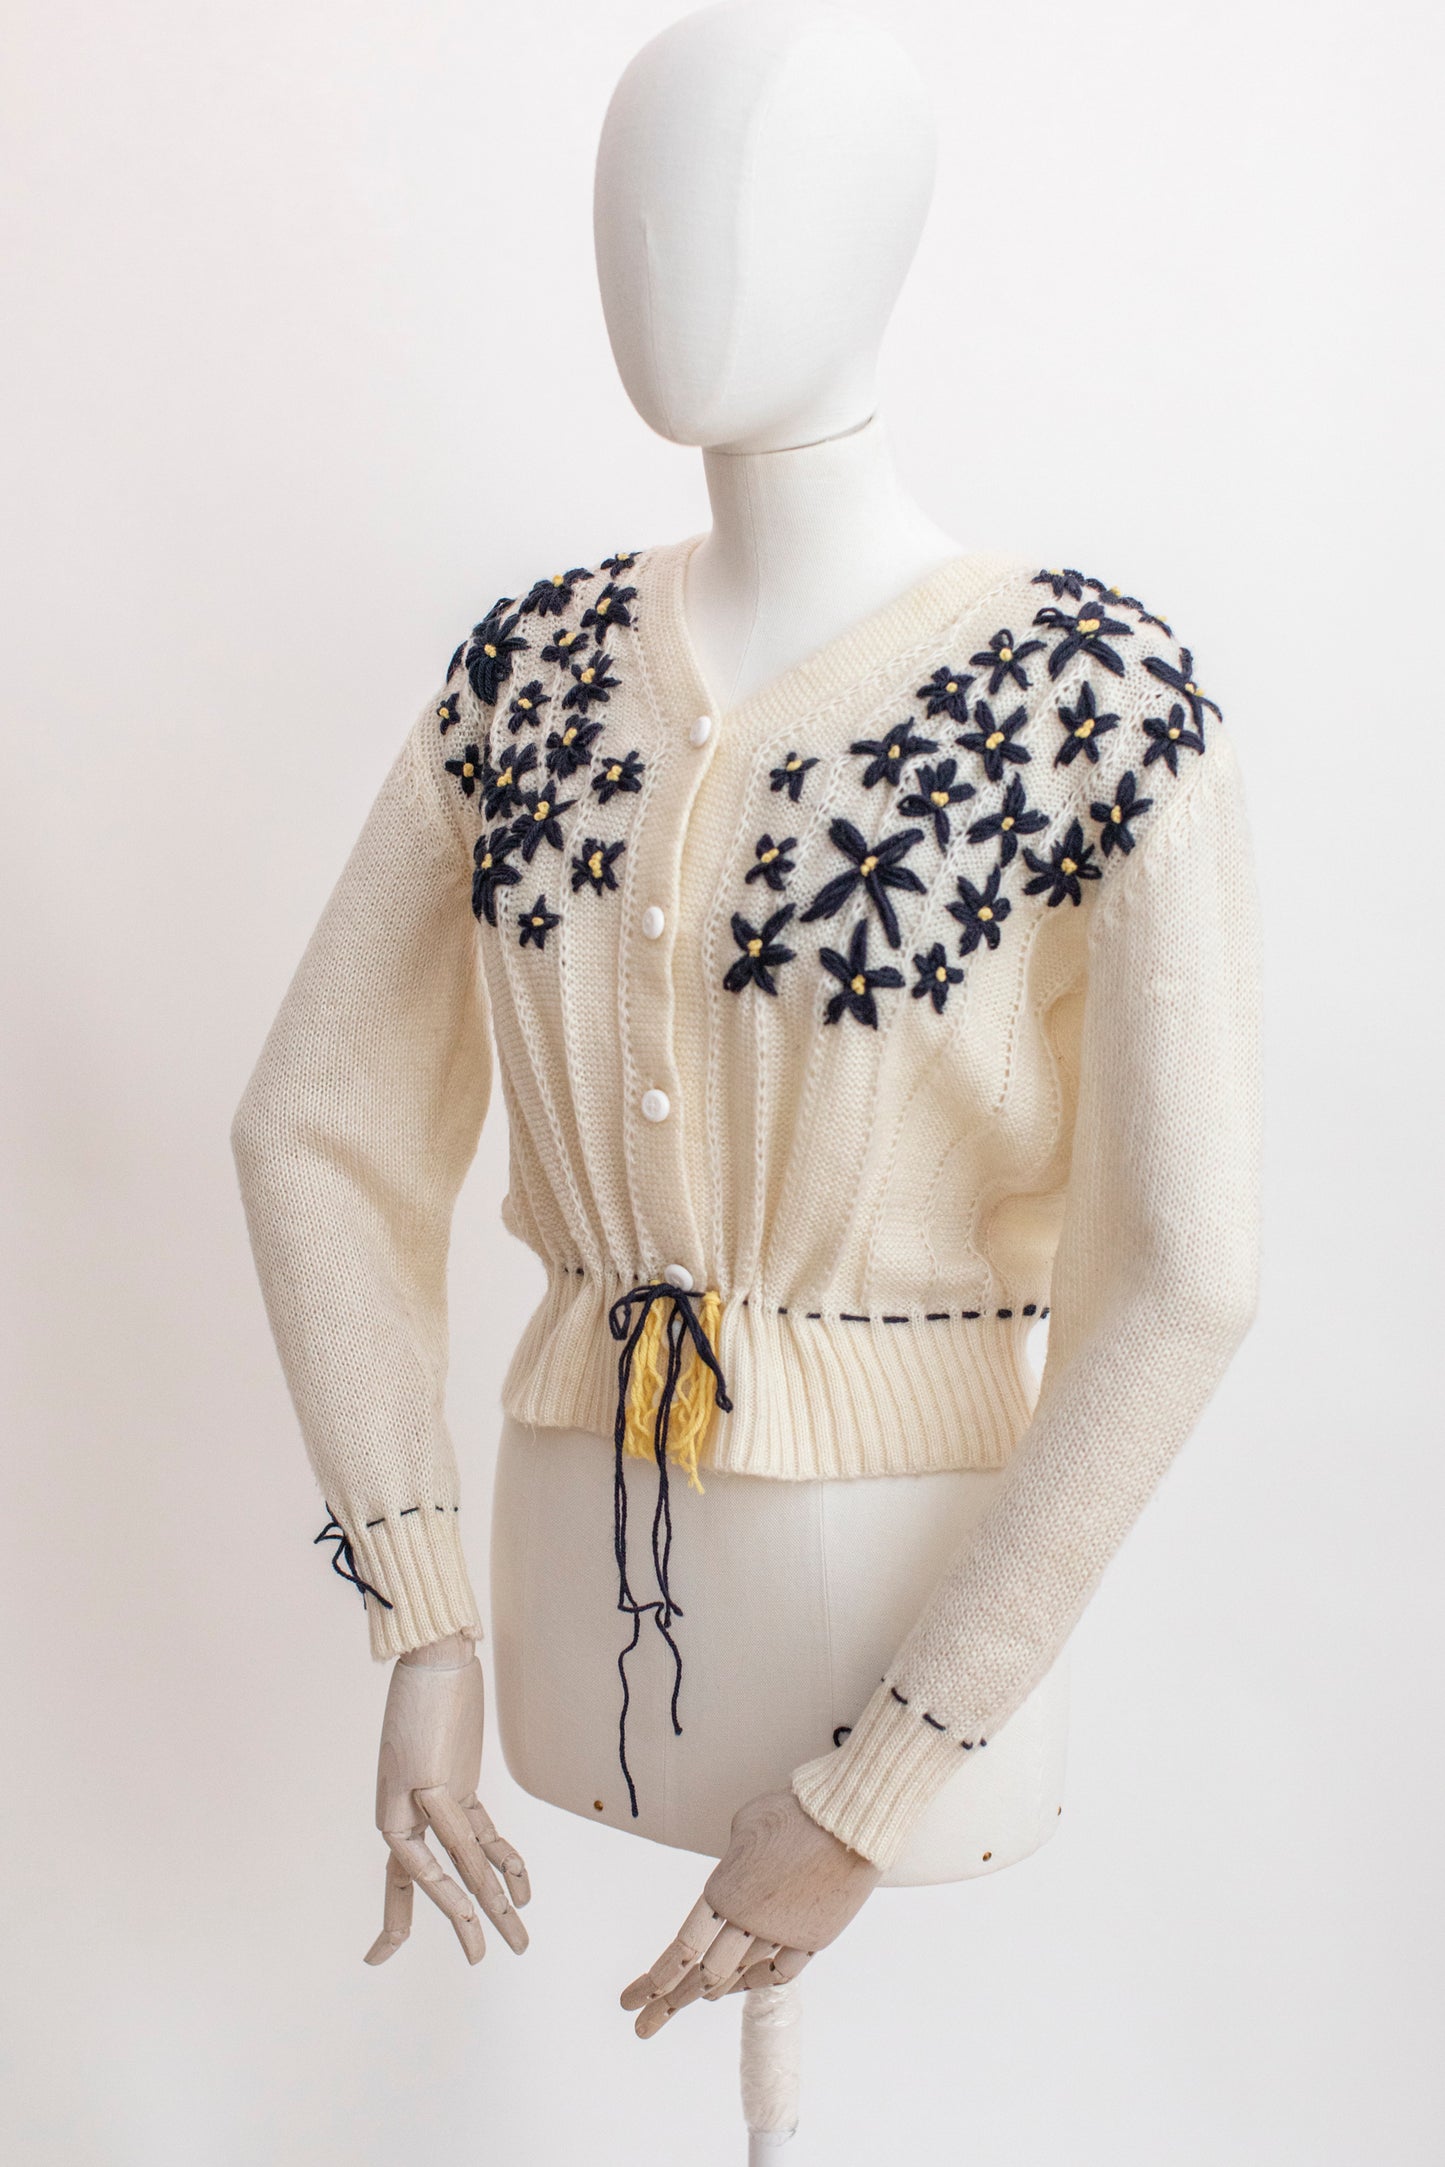 Vintage Beige Austrian Cardigan with Black Floral Embroidery Size S-M